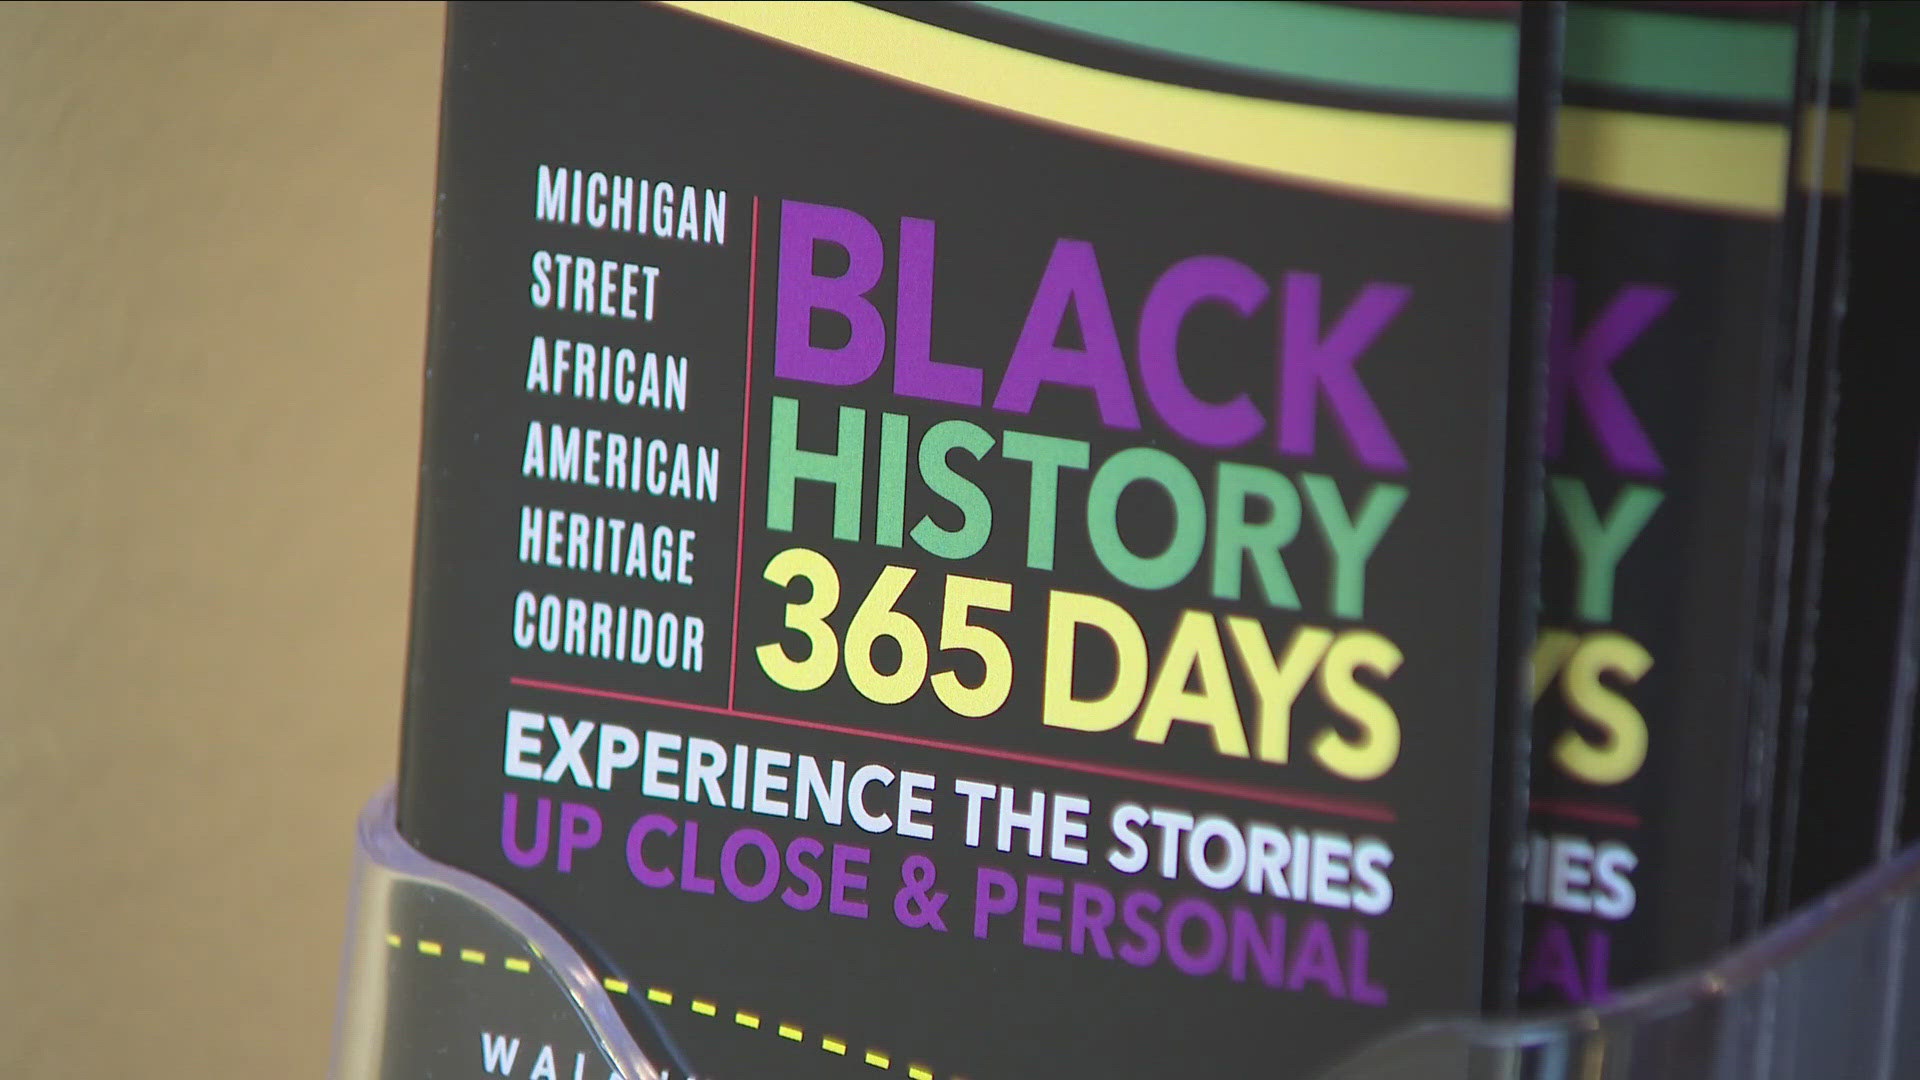 The Smithsonian's National Museum of African-American History and Culture is helping Buffalonians preserve local Black history.